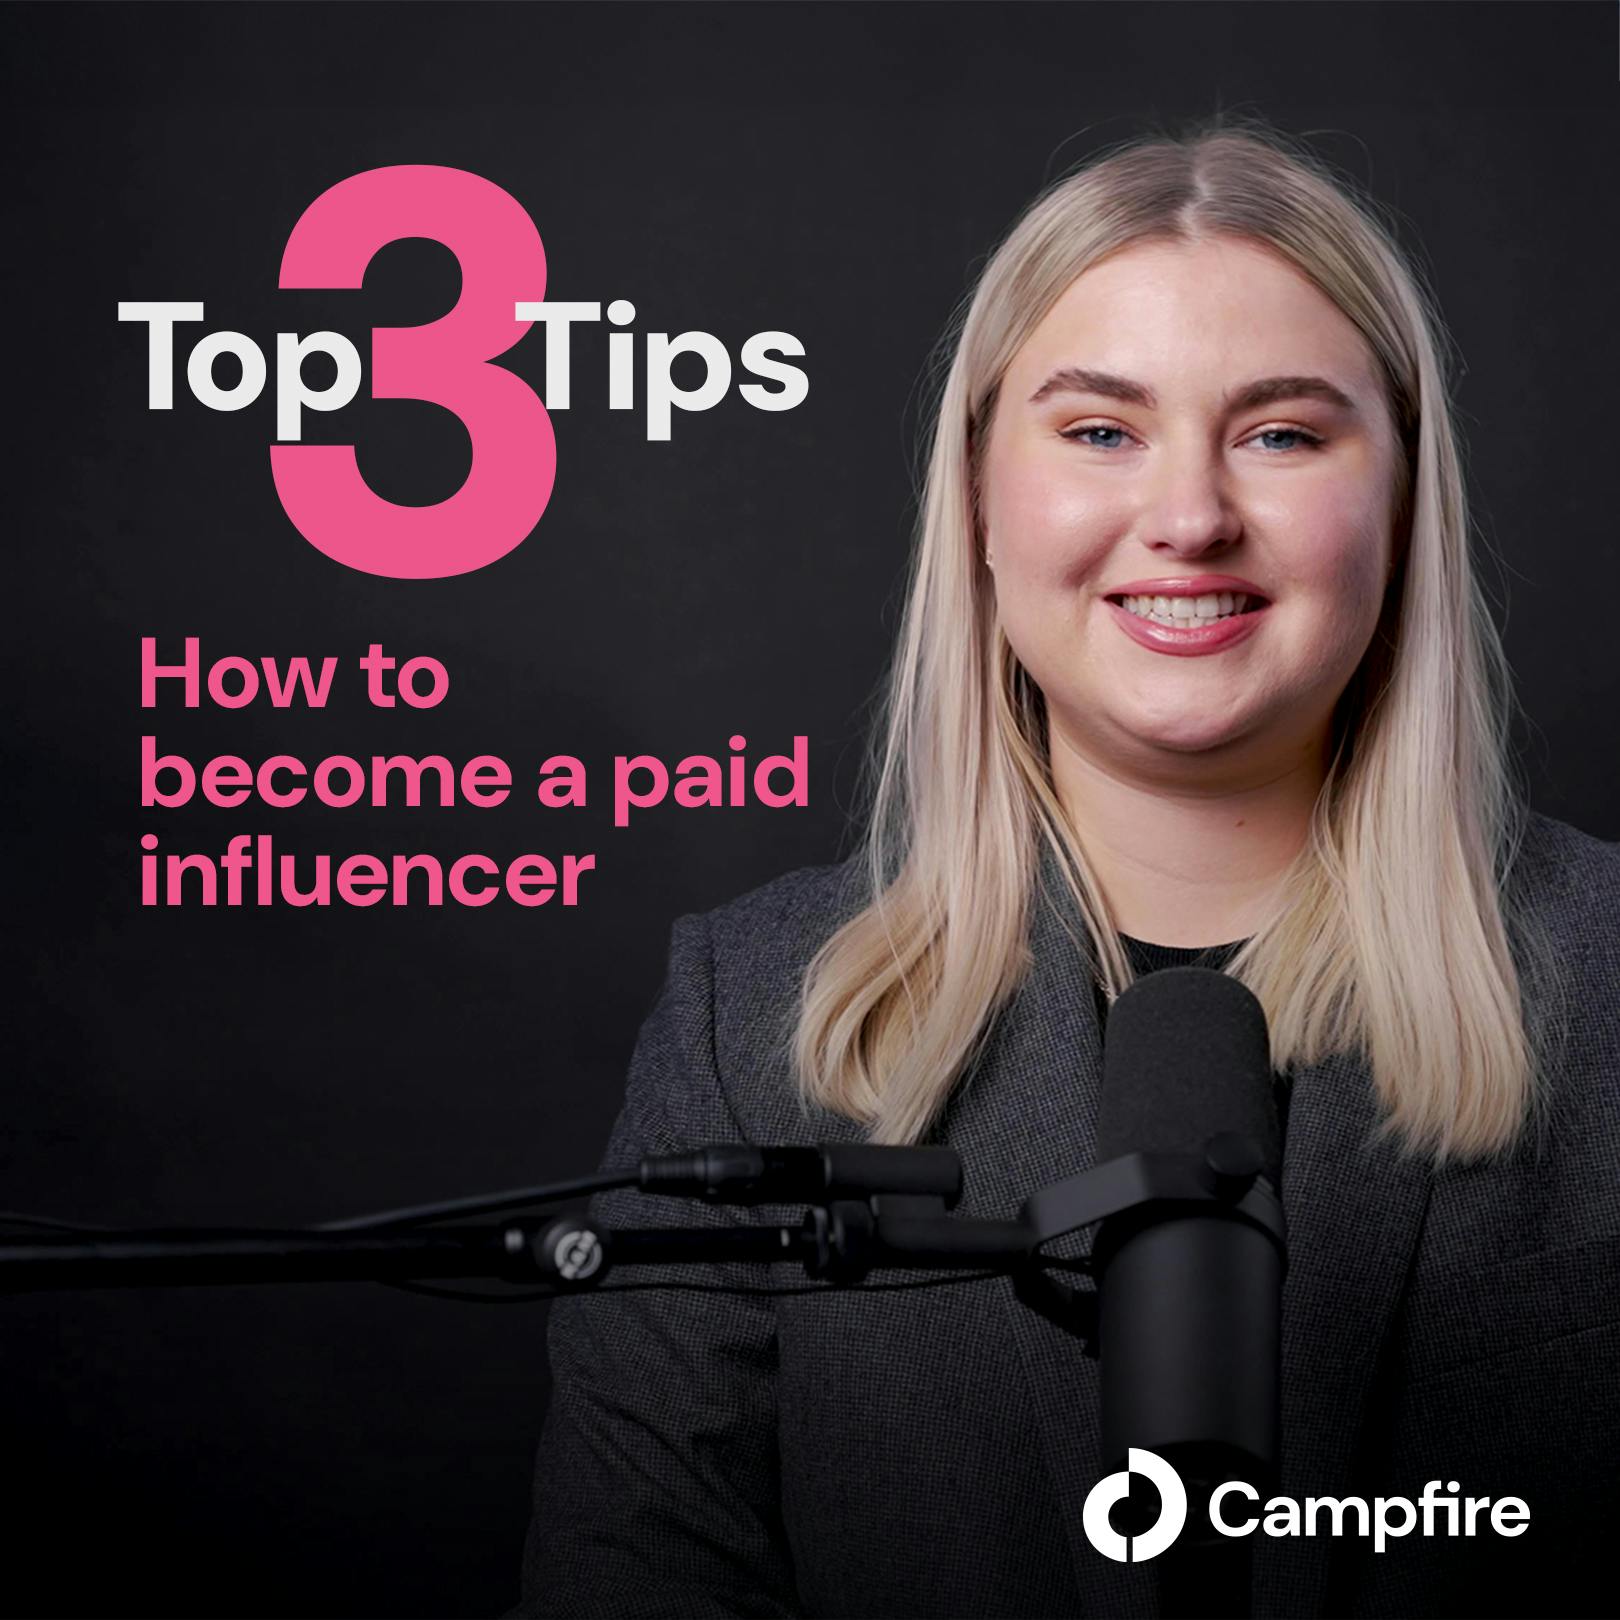 Top 3 Tips On How To Become a Paid Influencer